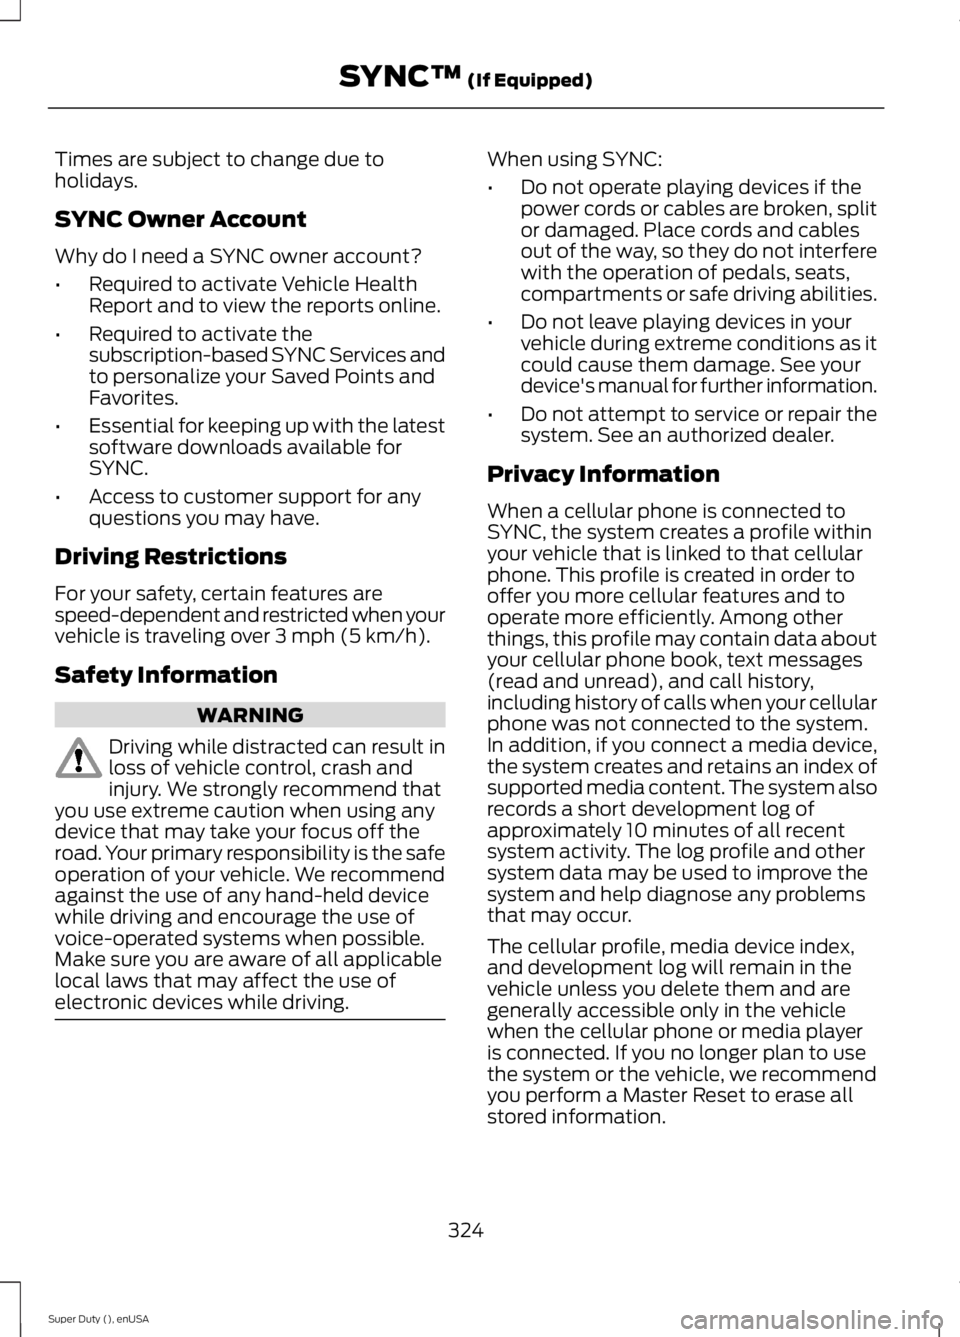 FORD F250 SUPER DUTY 2015  Owners Manual Times are subject to change due toholidays.
SYNC Owner Account
Why do I need a SYNC owner account?
•Required to activate Vehicle HealthReport and to view the reports online.
•Required to activate 